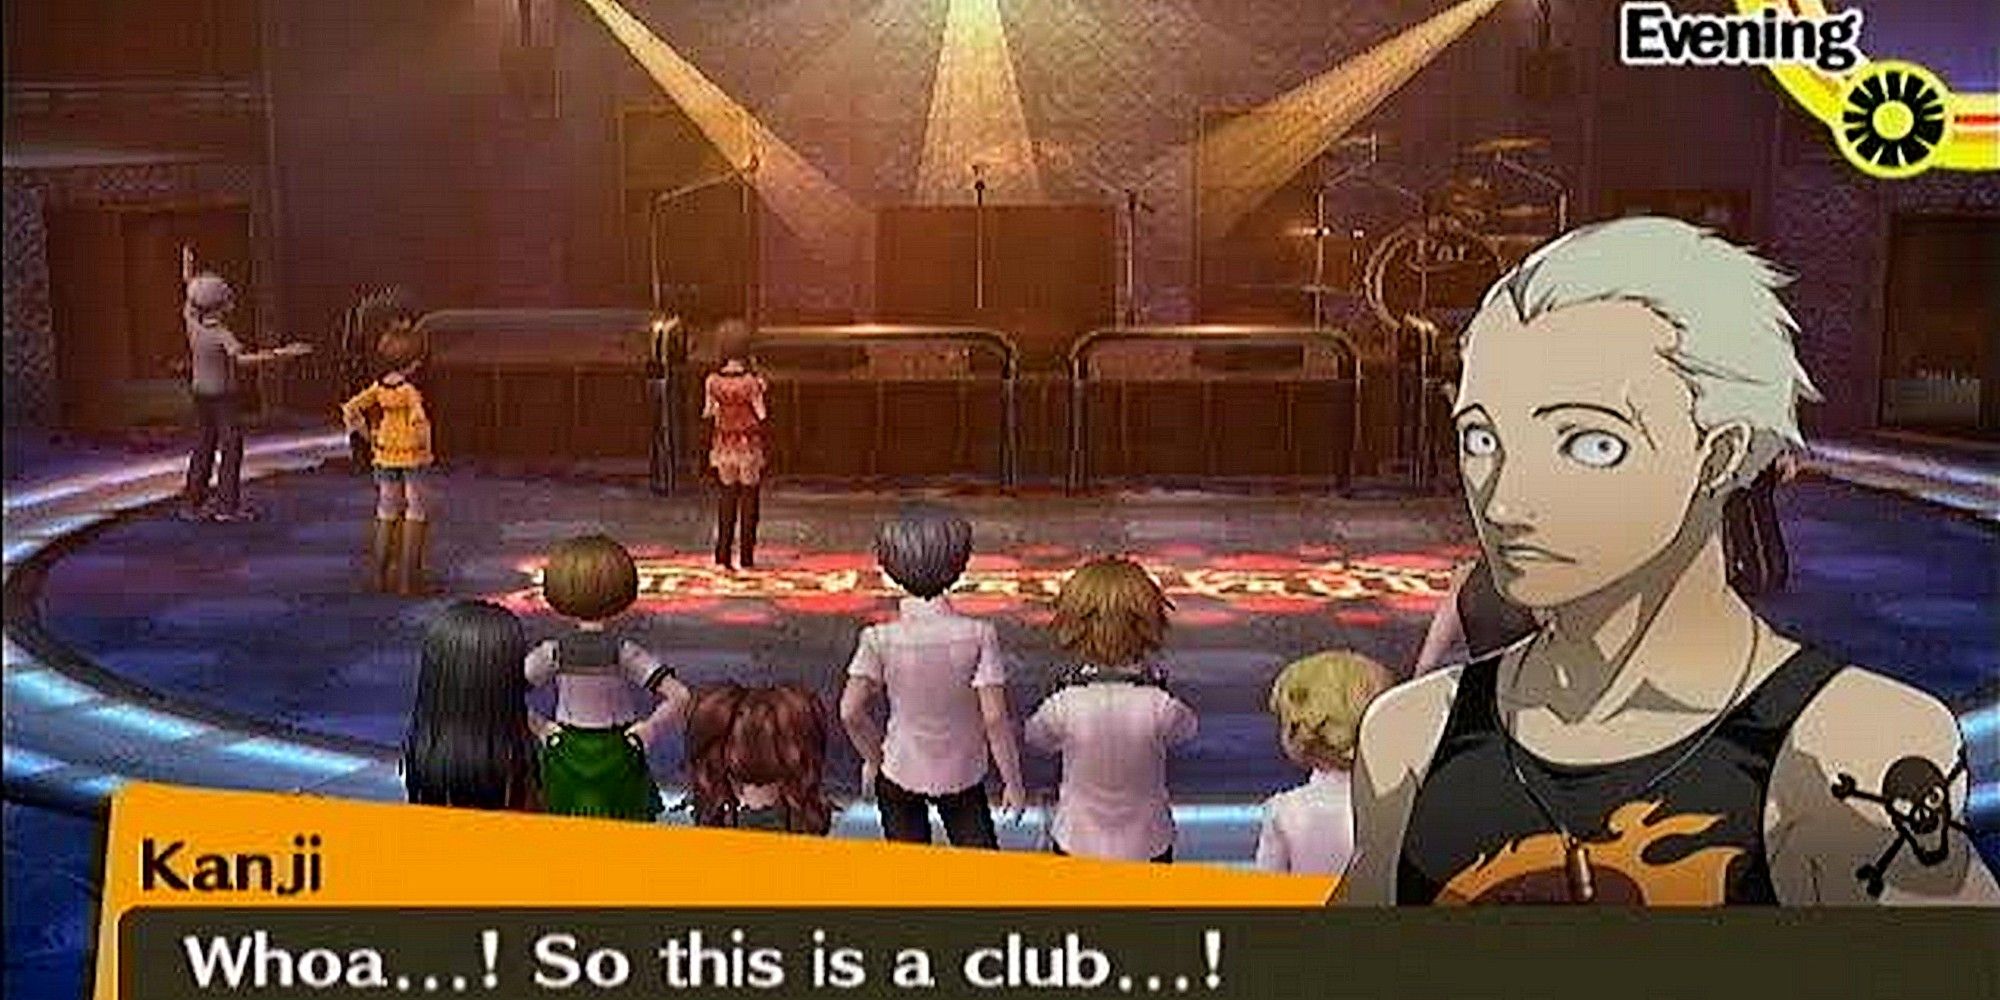 The nightclub from Persona 3 in Persona 4 Golden